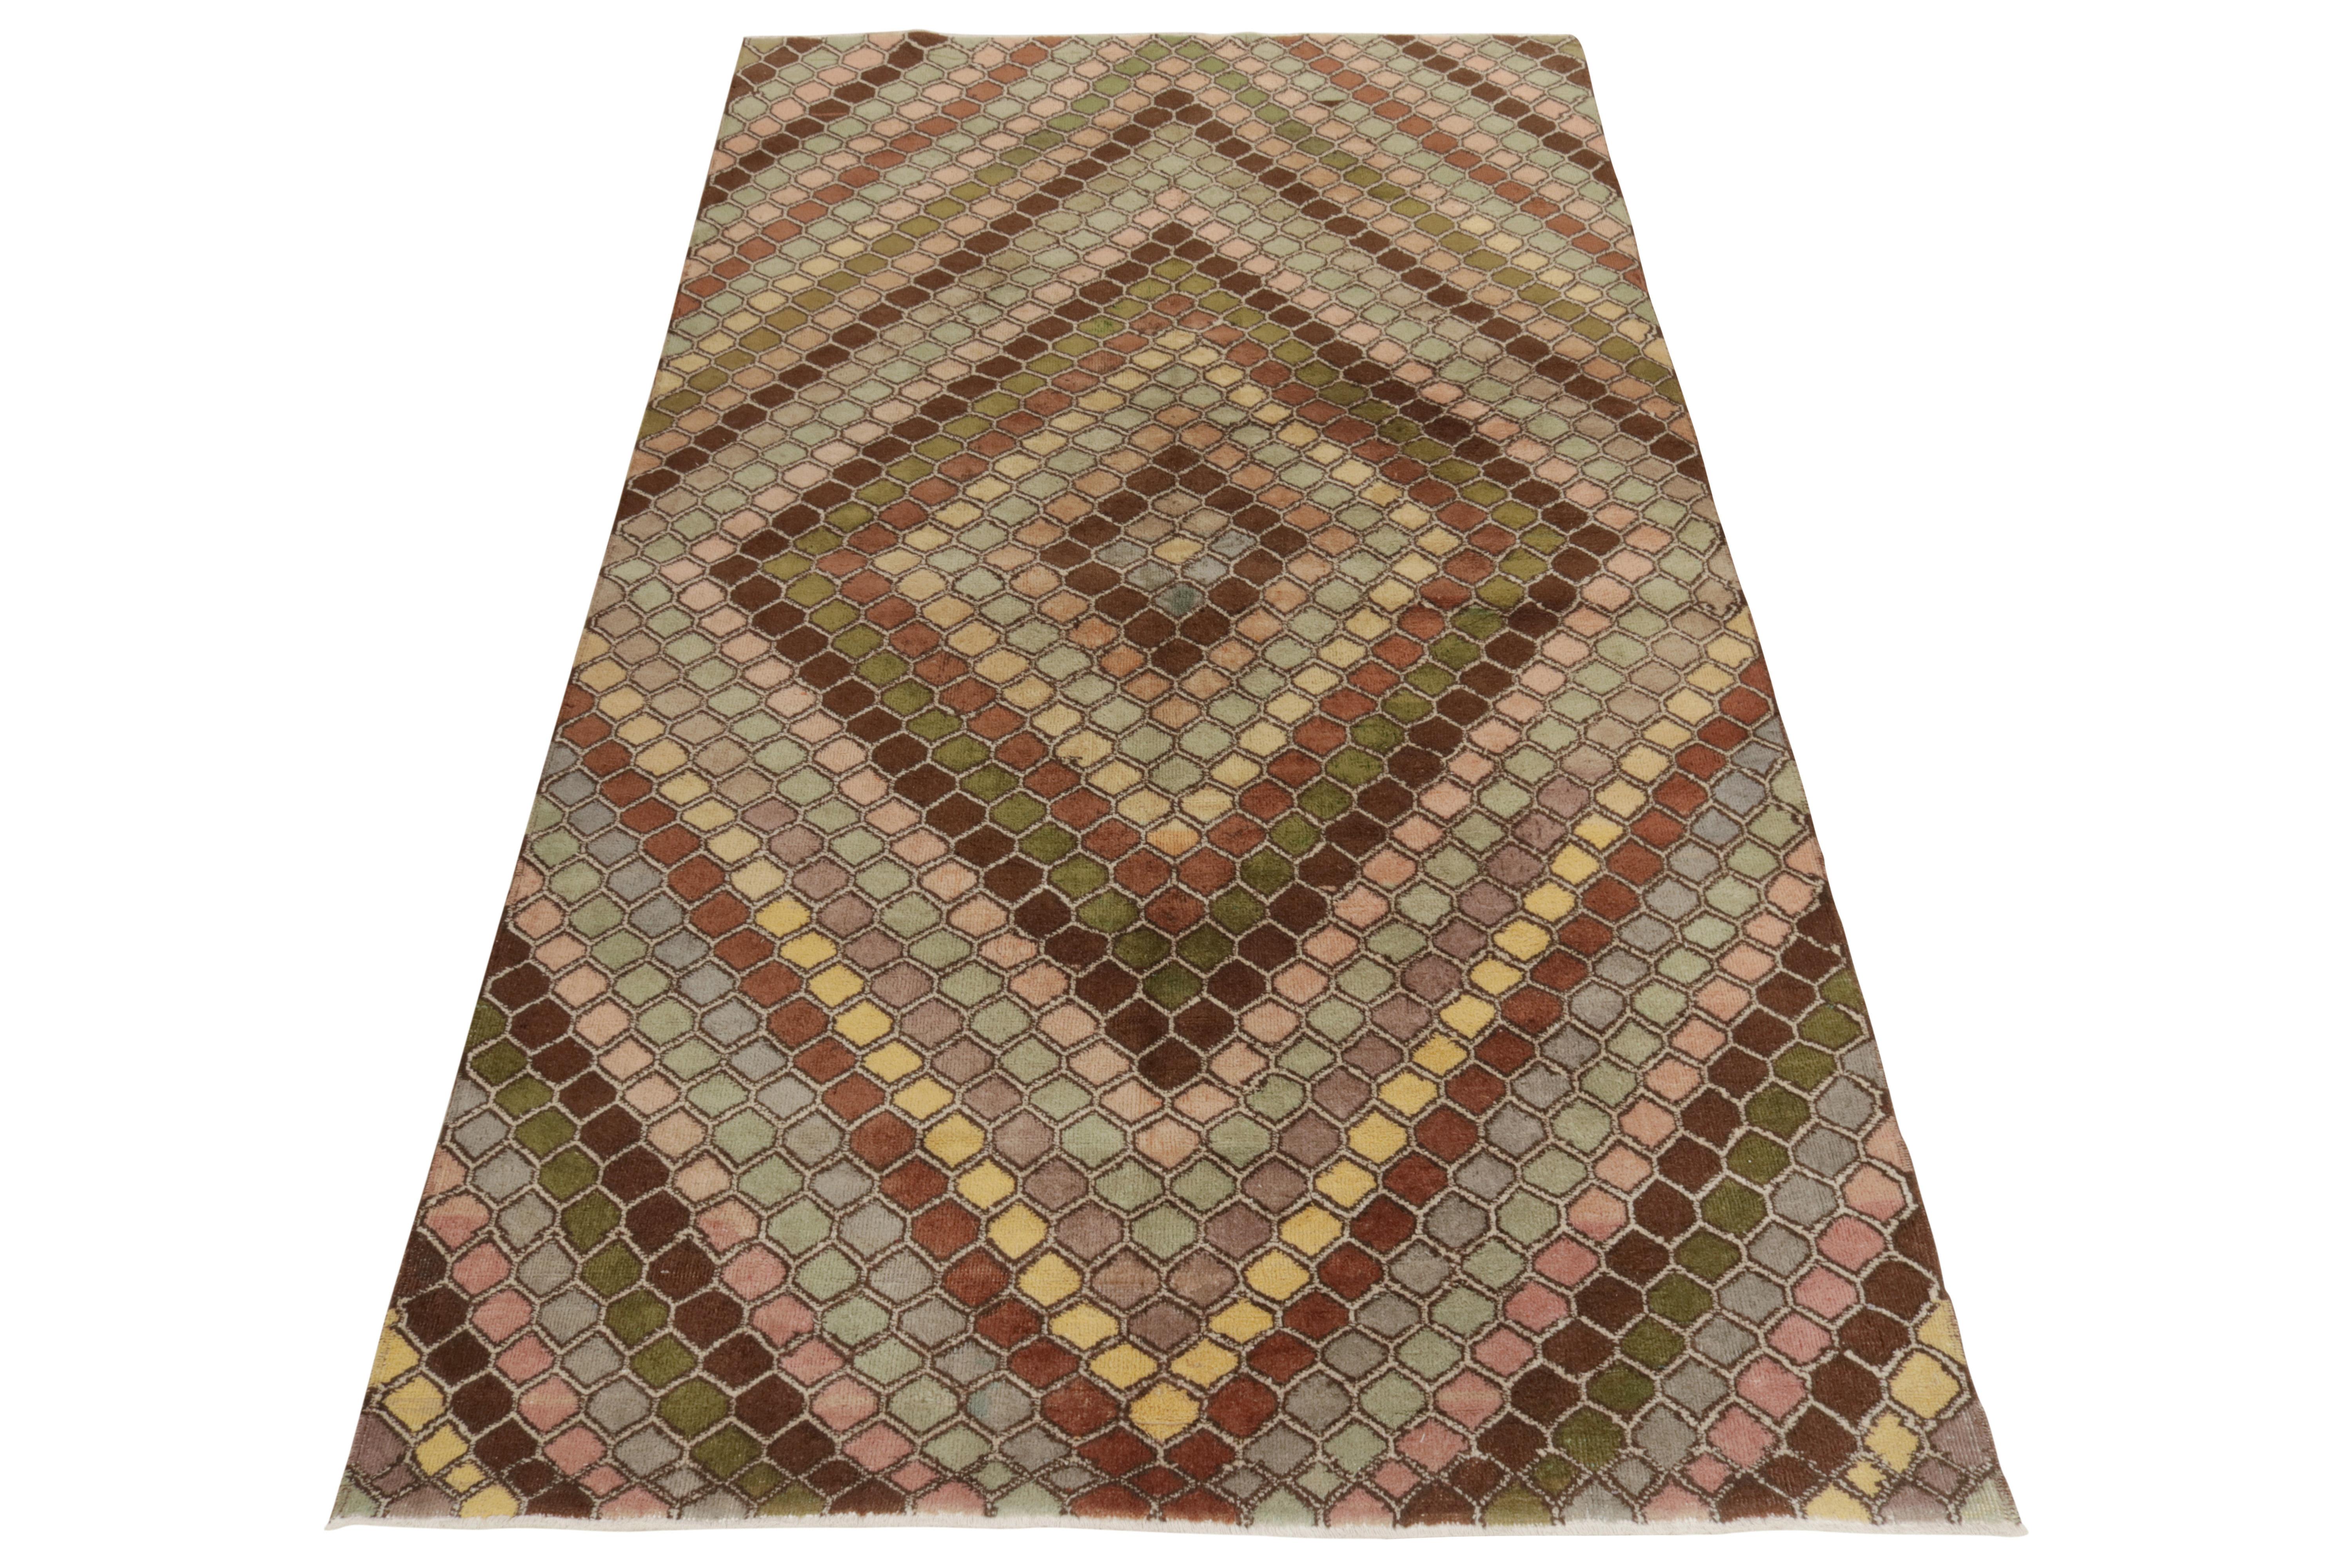 From Rug & Kilim’s Mid century Pasha collection, a 1960s piece celebrating the works of a bold designer from Turkey. Exemplifying the artist’s renowned take on Art Deco sensibilities, this full pile piece relishes an all over honeycomb lattice